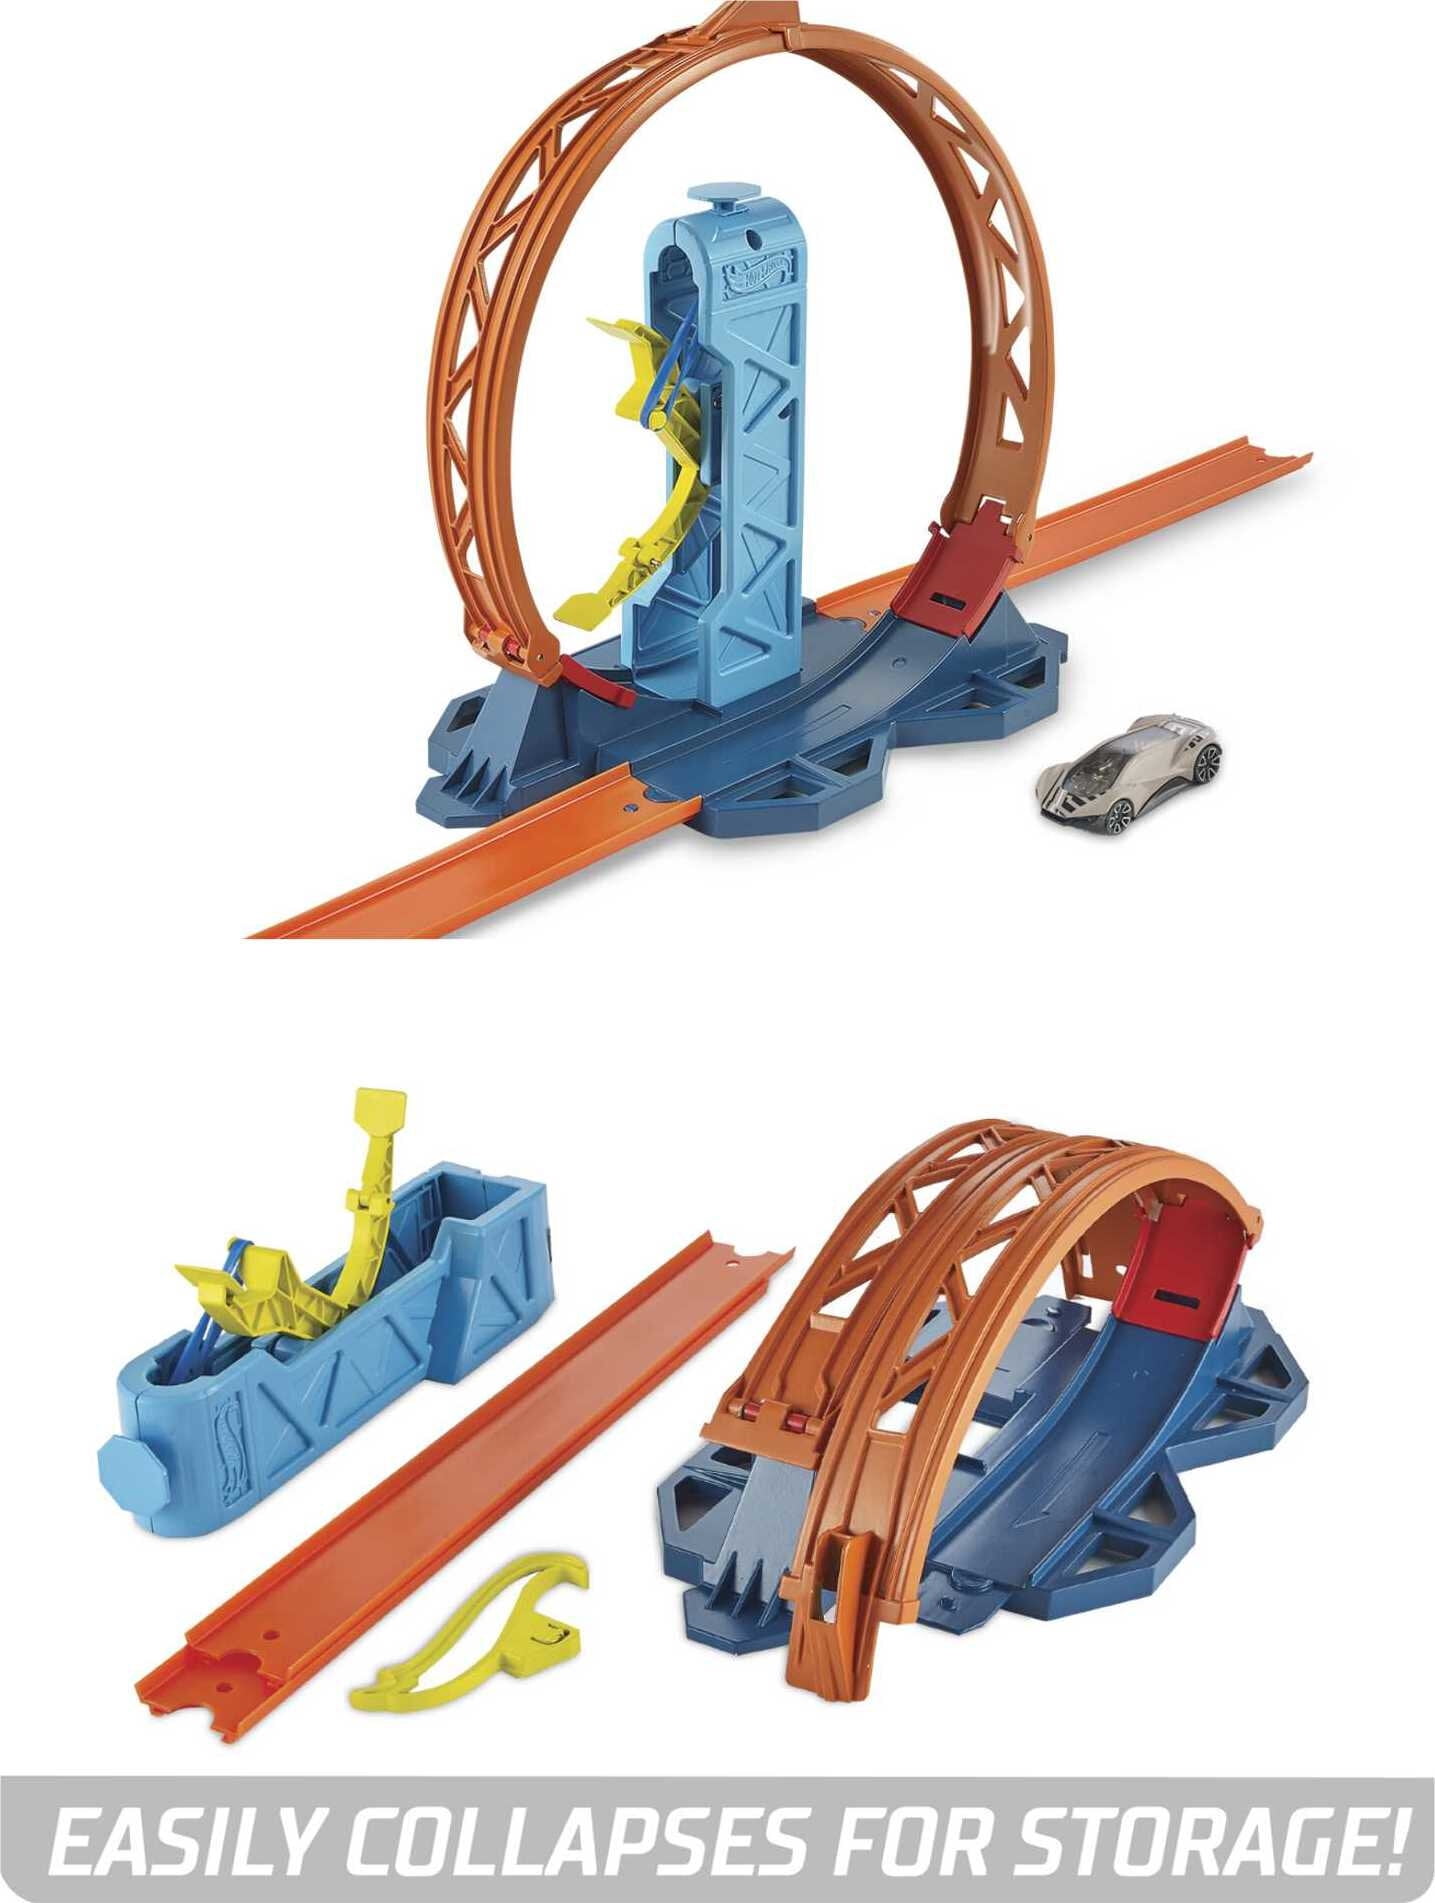 Looping for Hot Wheels + Free Track